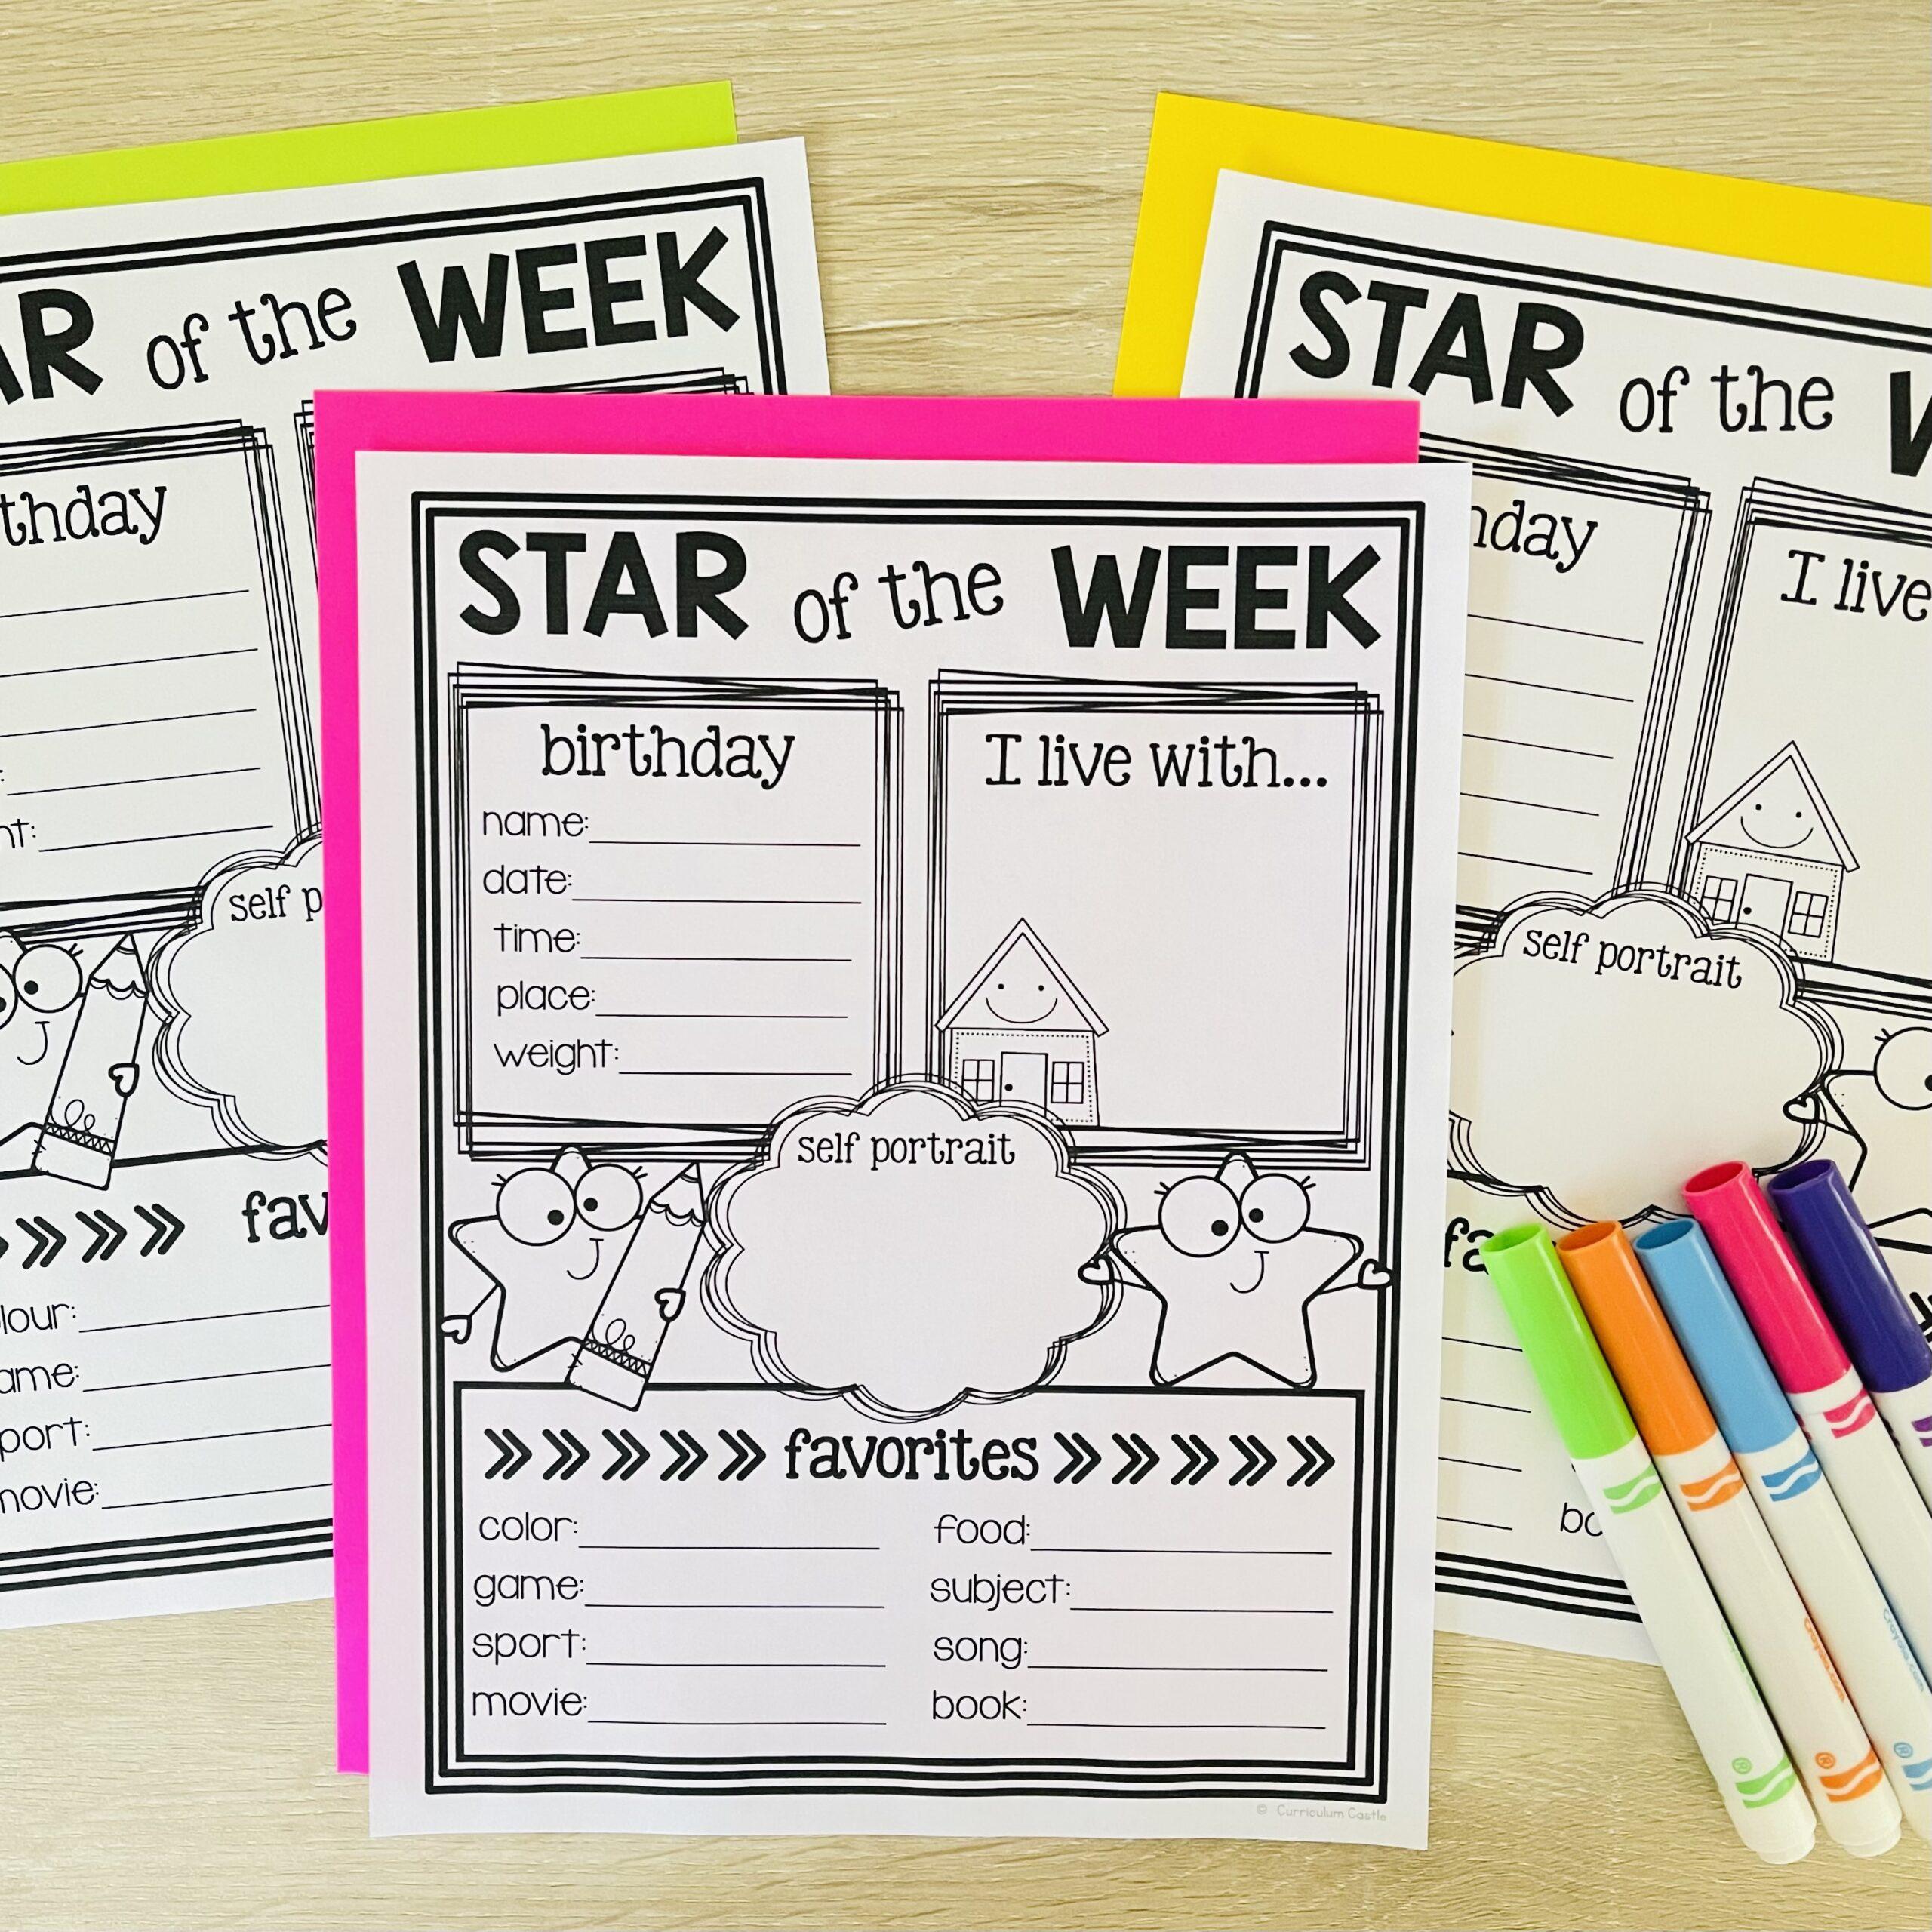 Back to School Flip Books for Kindergarten and First Grade by Star